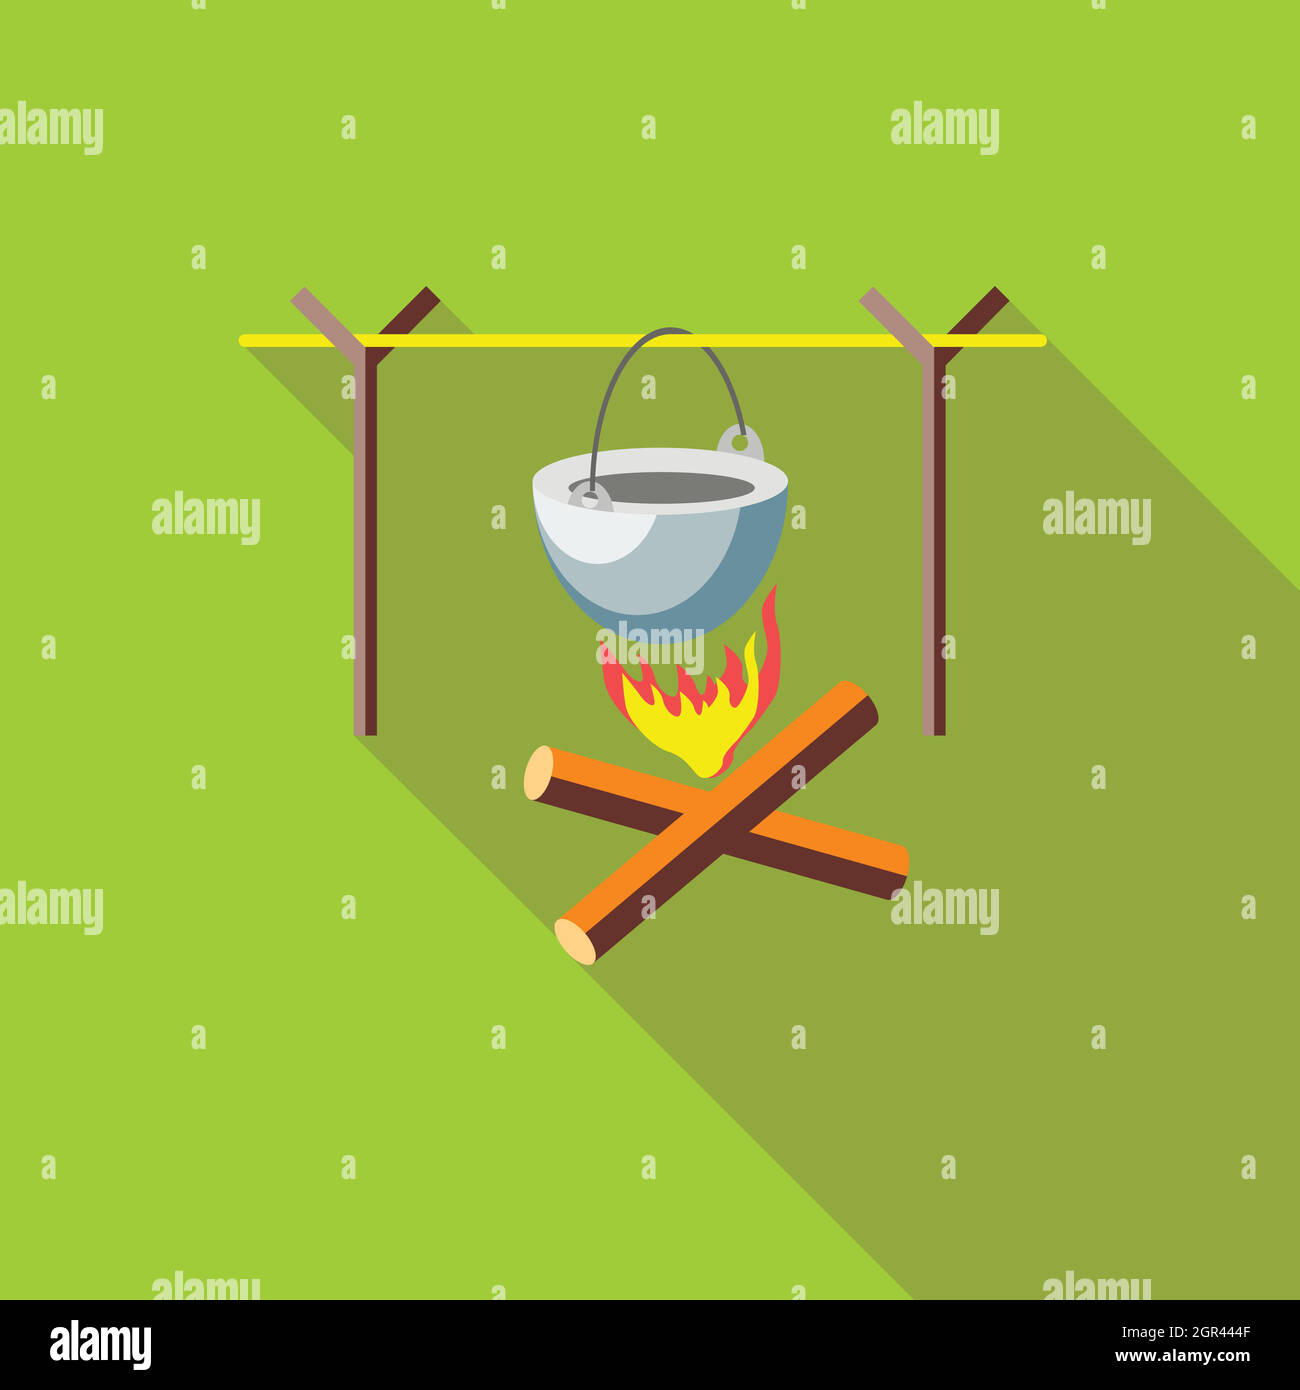 Campfire with cauldron icon, flat style Stock Vector